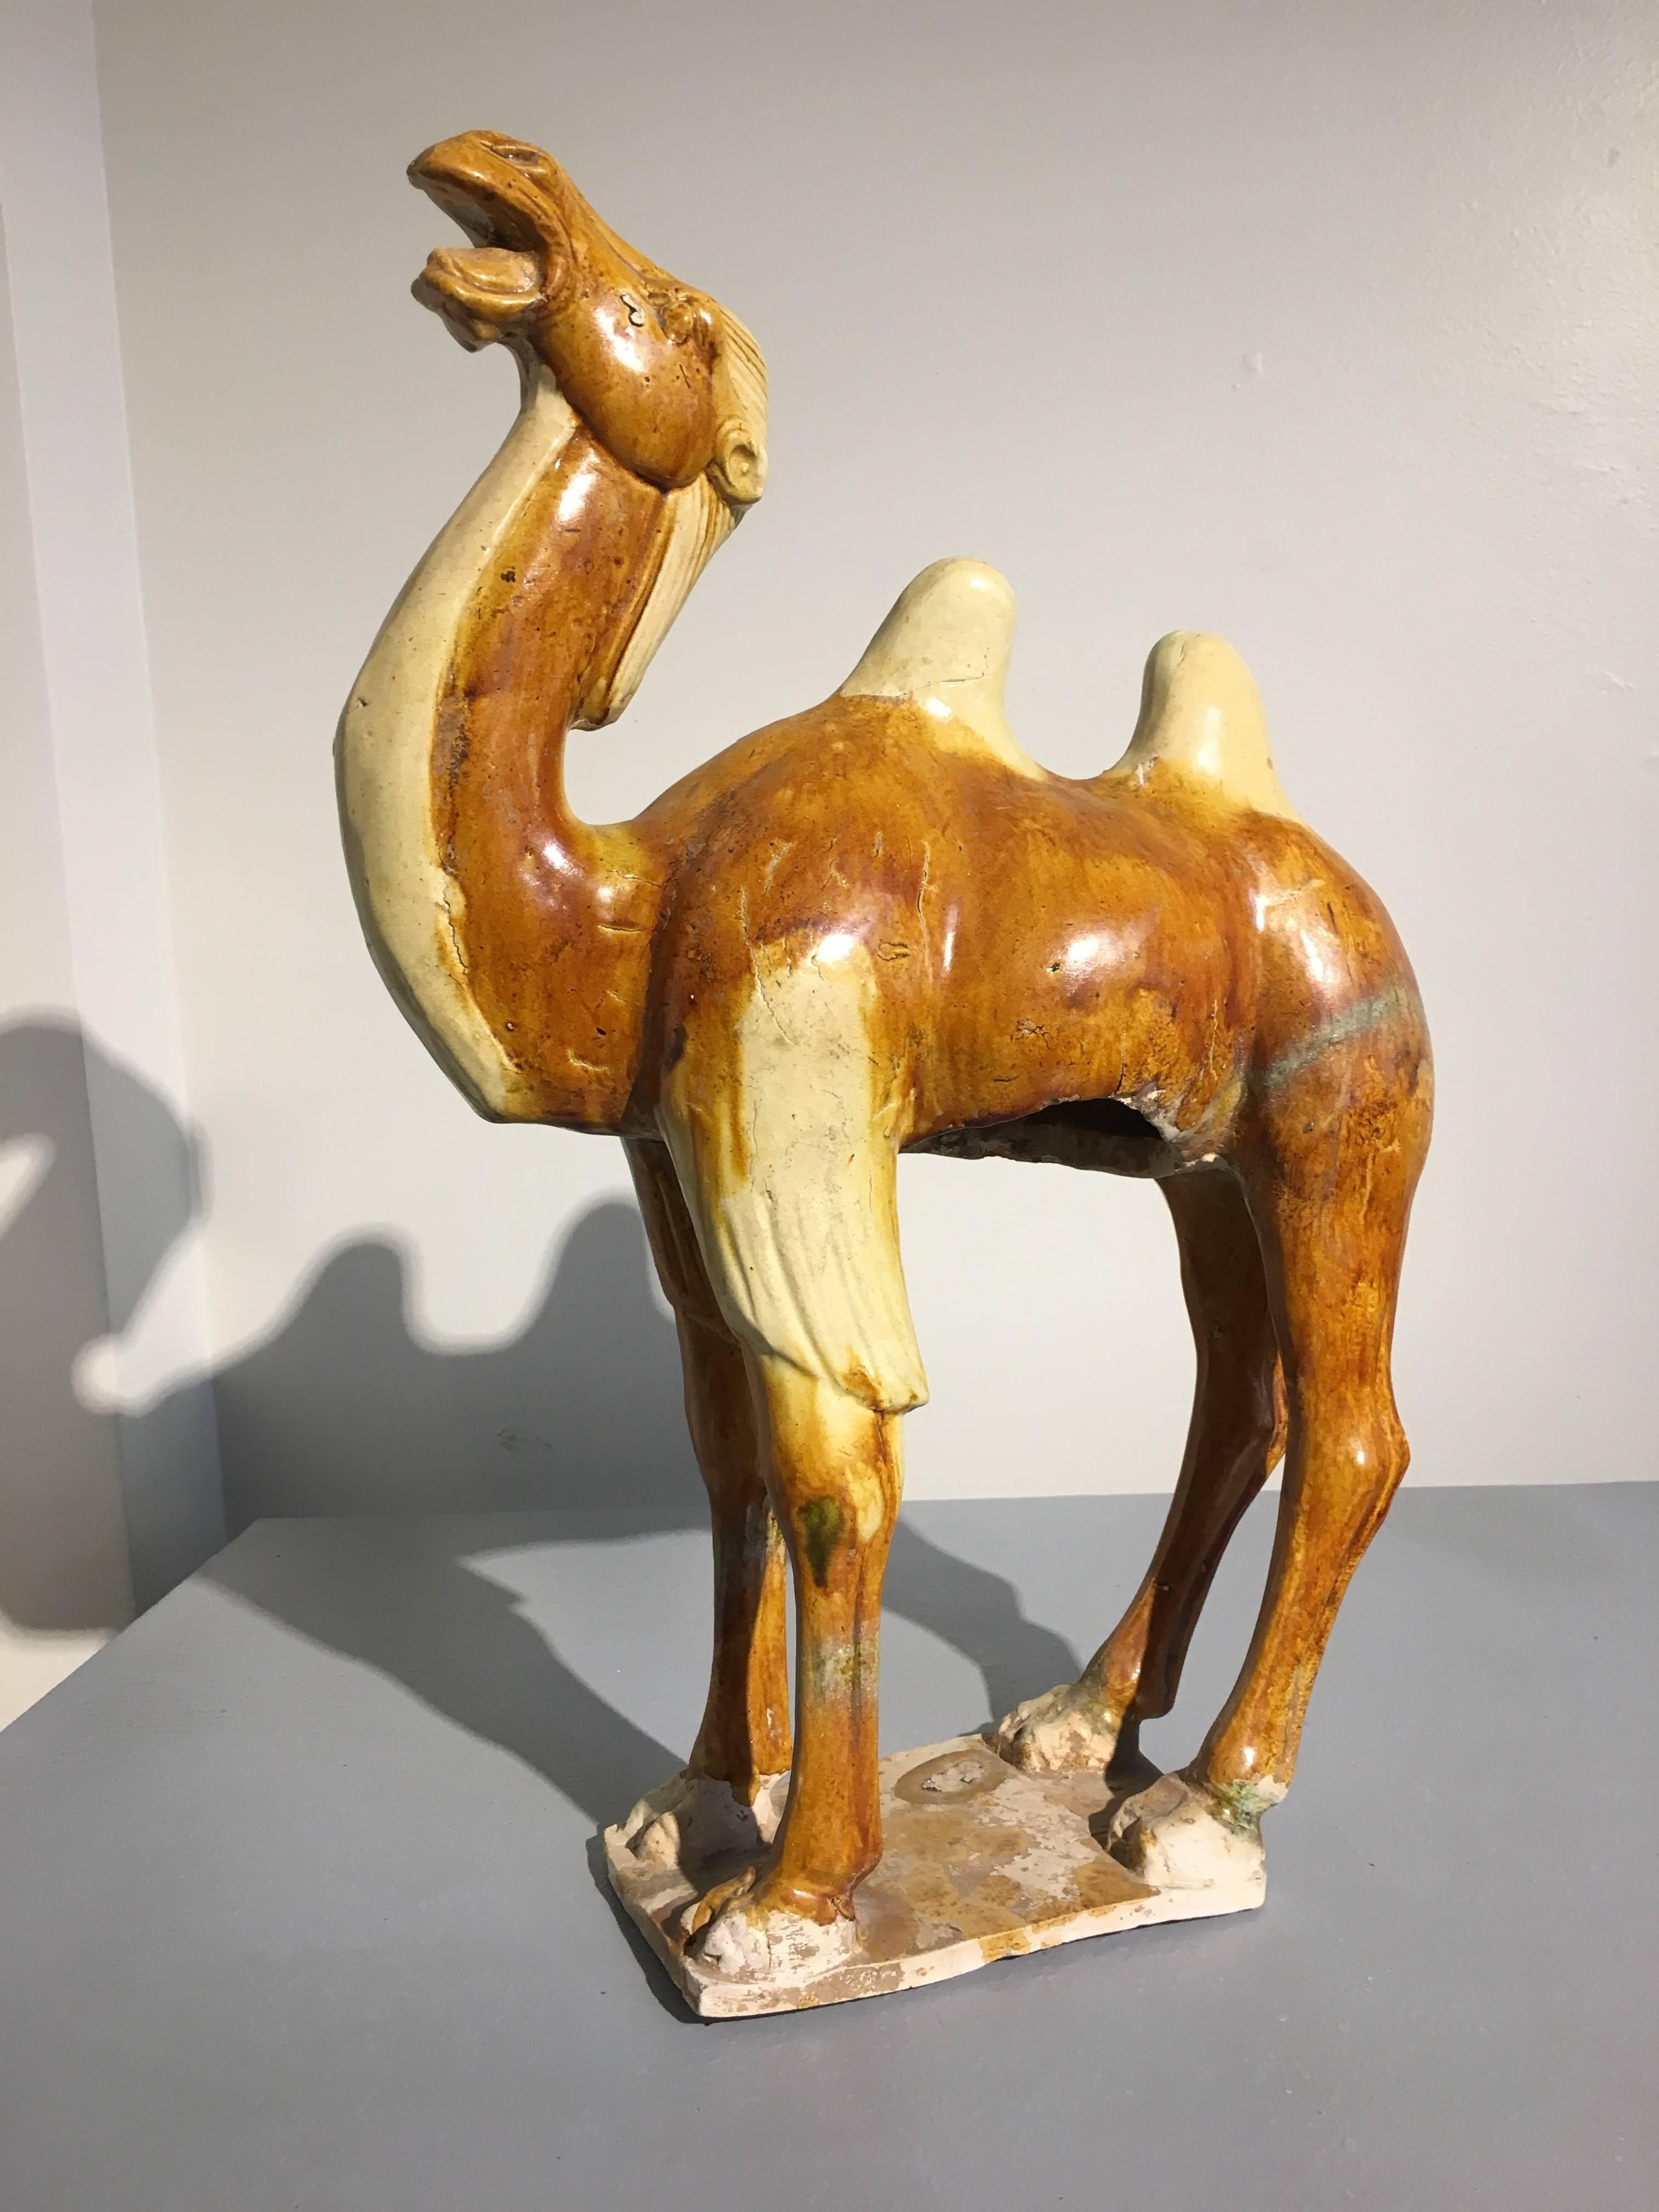 An evocative Chinese Tang dynasty (618 to 906 AD) sancai glazed pottery model of a braying camel. The camel is well modeled, standing foursquare upon a rectangular plinth, neck raised, head thrown back, and mouth open in either a defiant, or